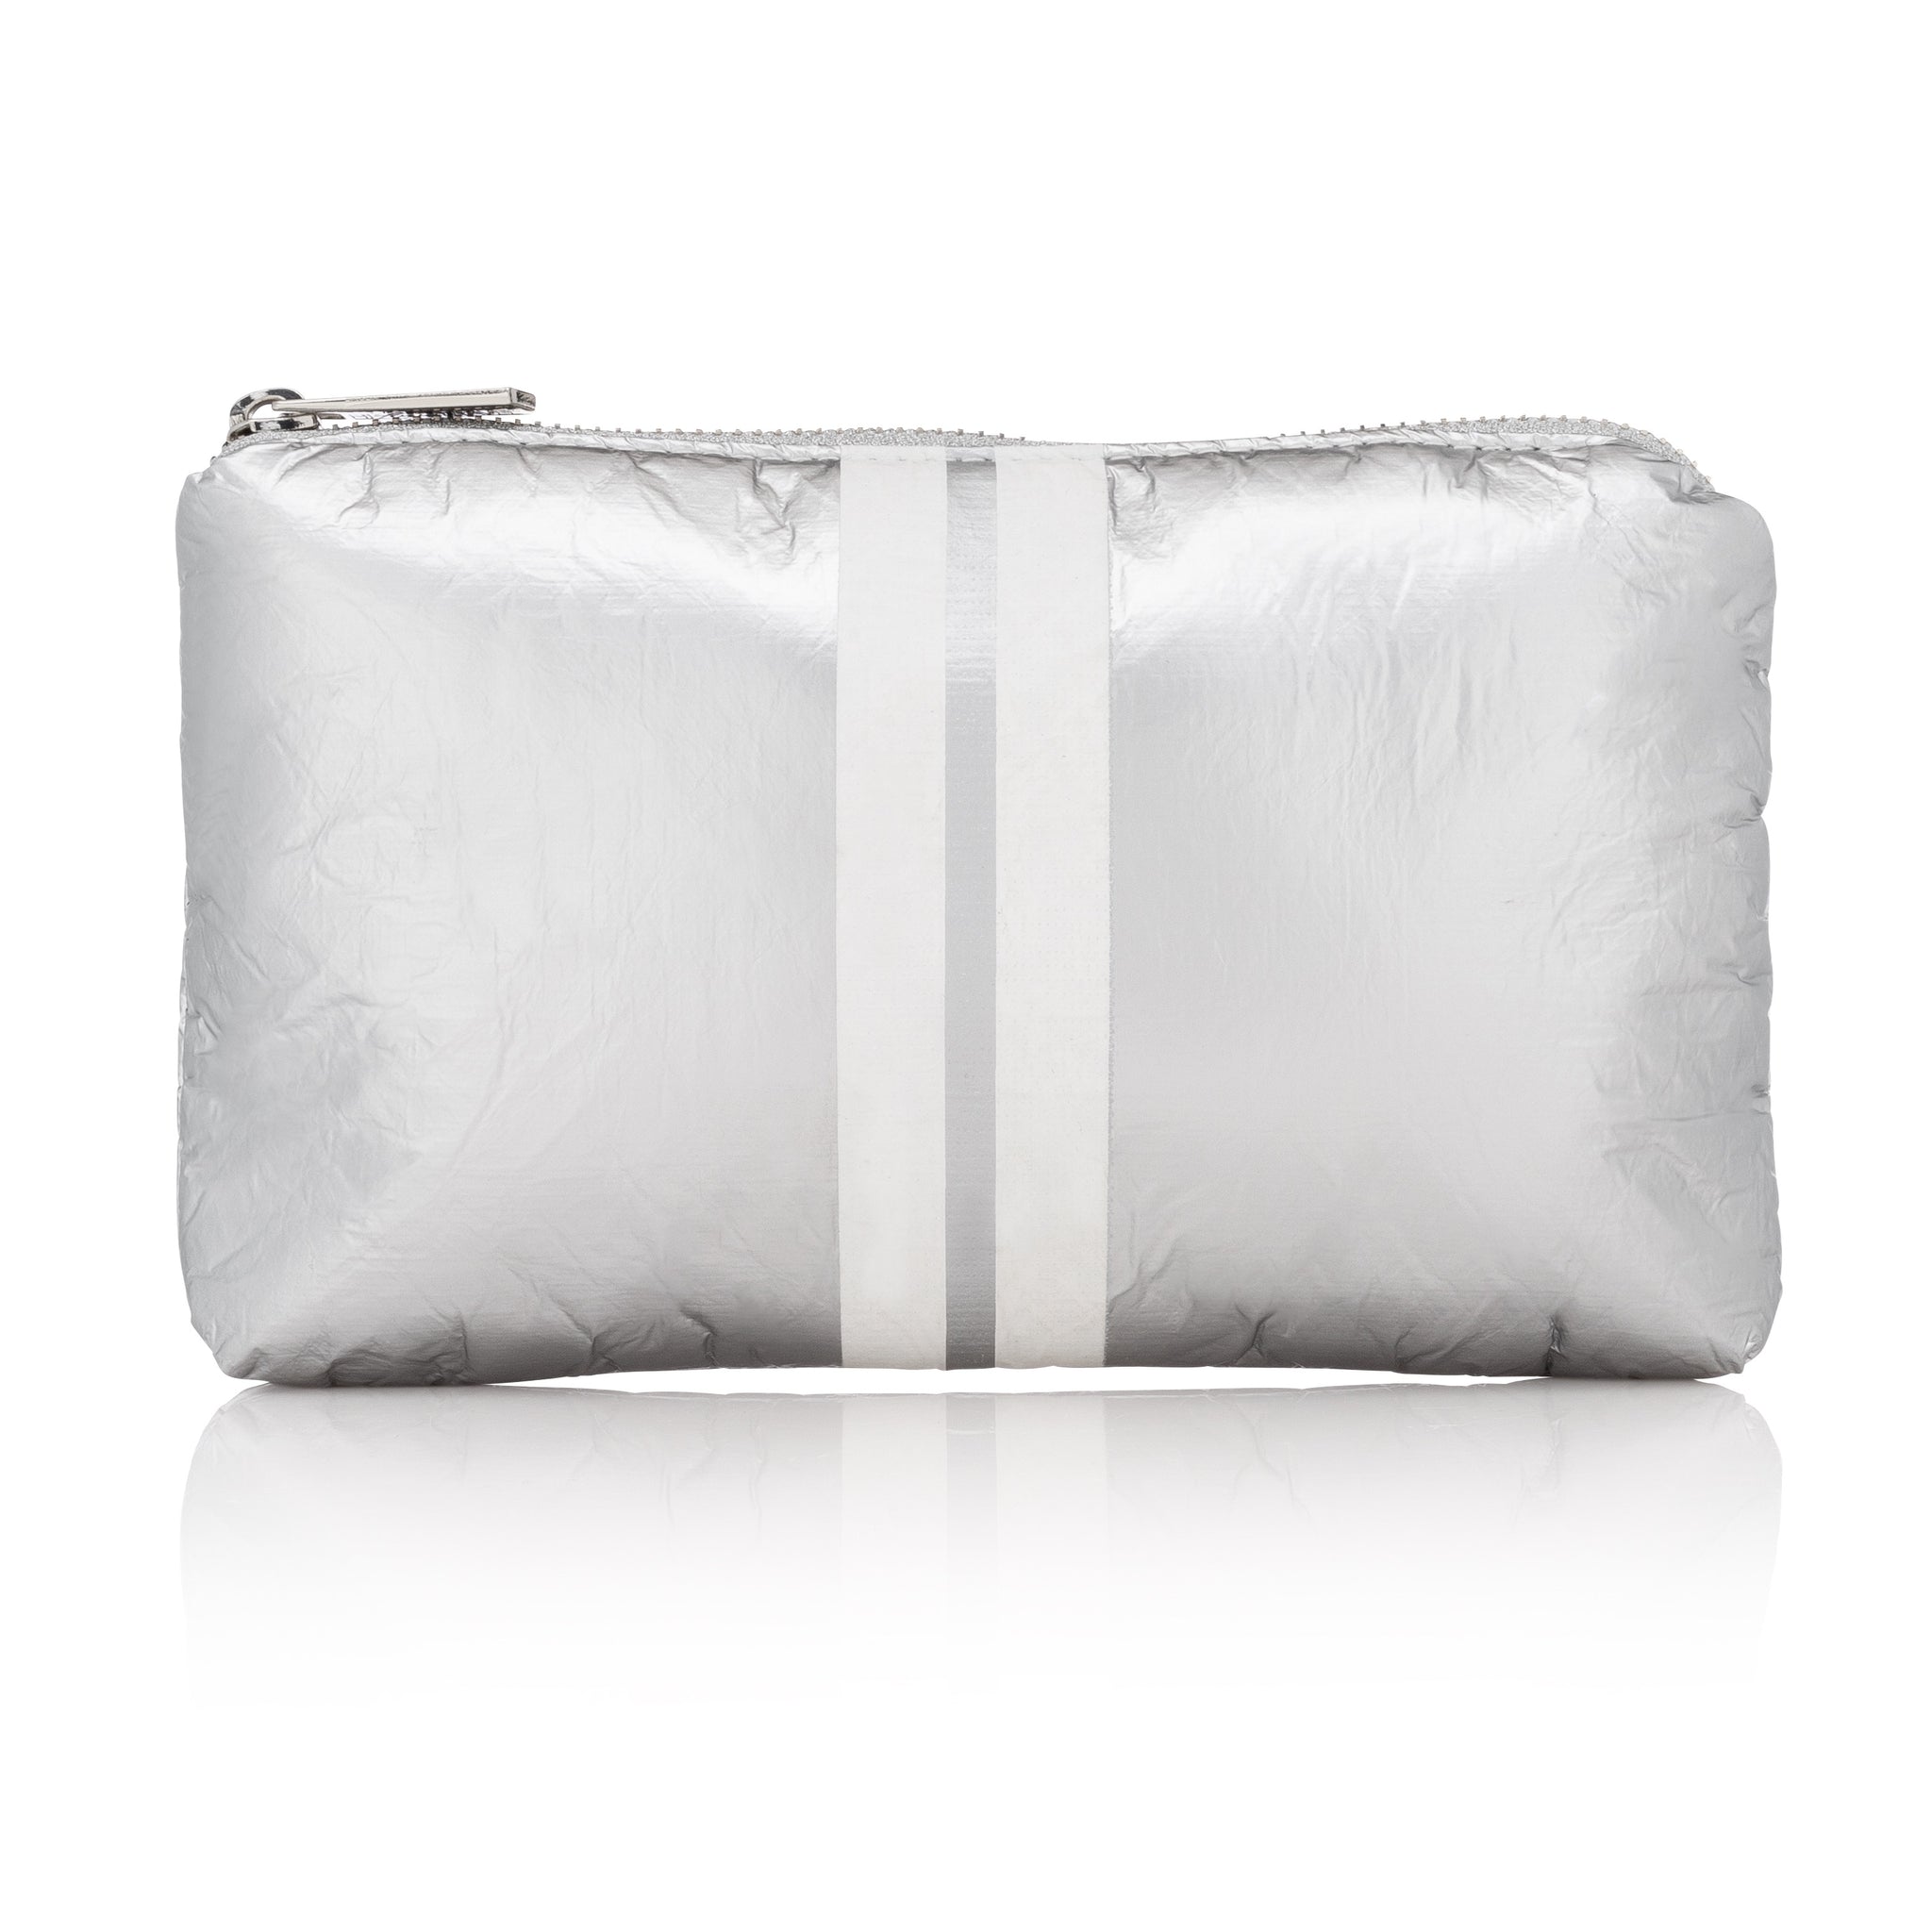 Cute Travel Bag - Mini Padded Pack - Metallic Silver Collection with Shimmer White Stripes